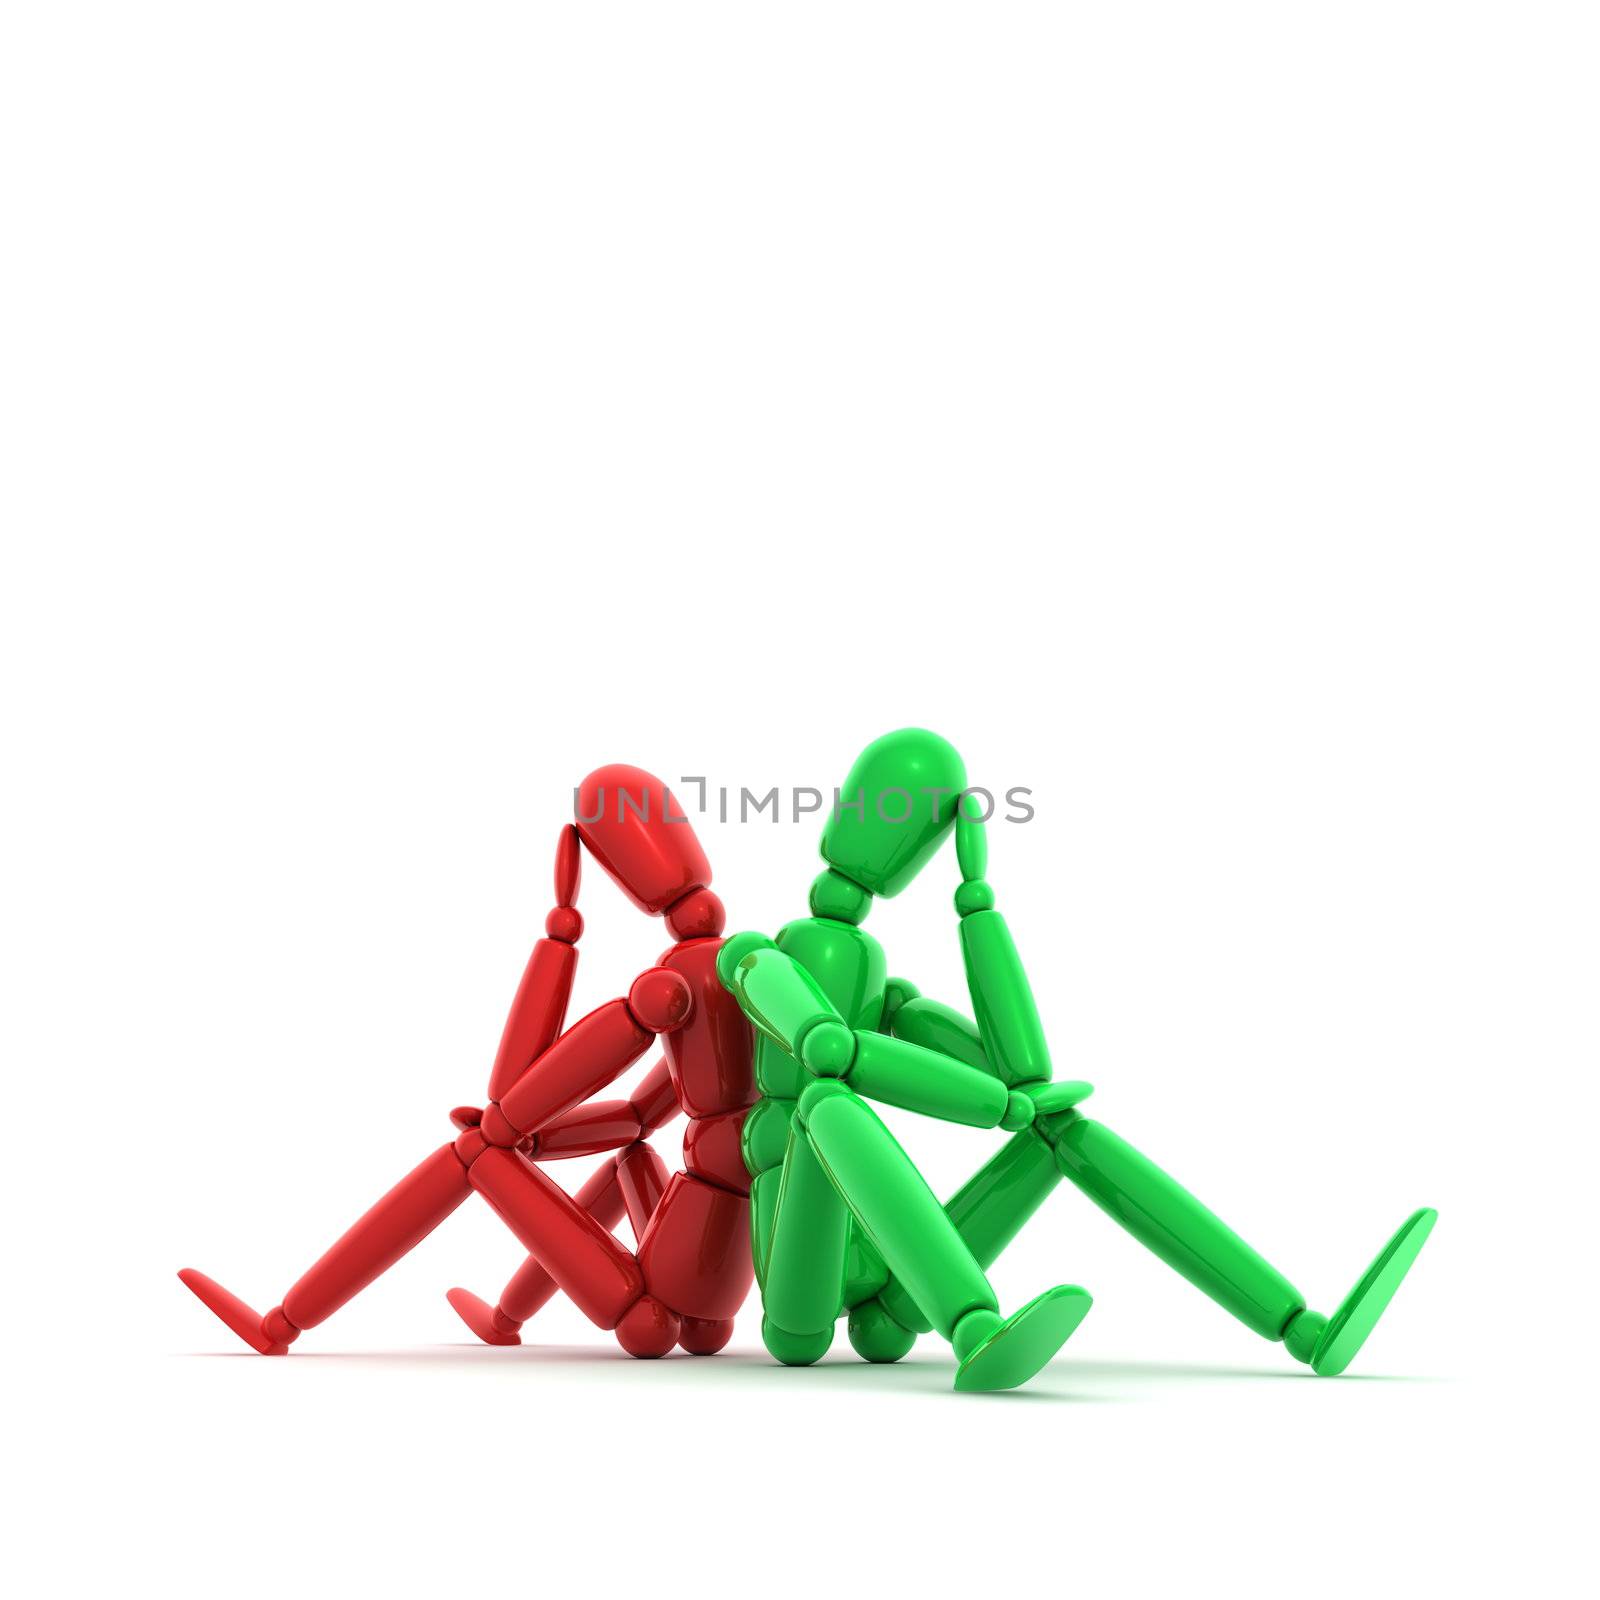 two lay figures in red and green sitting on a white ground thinking